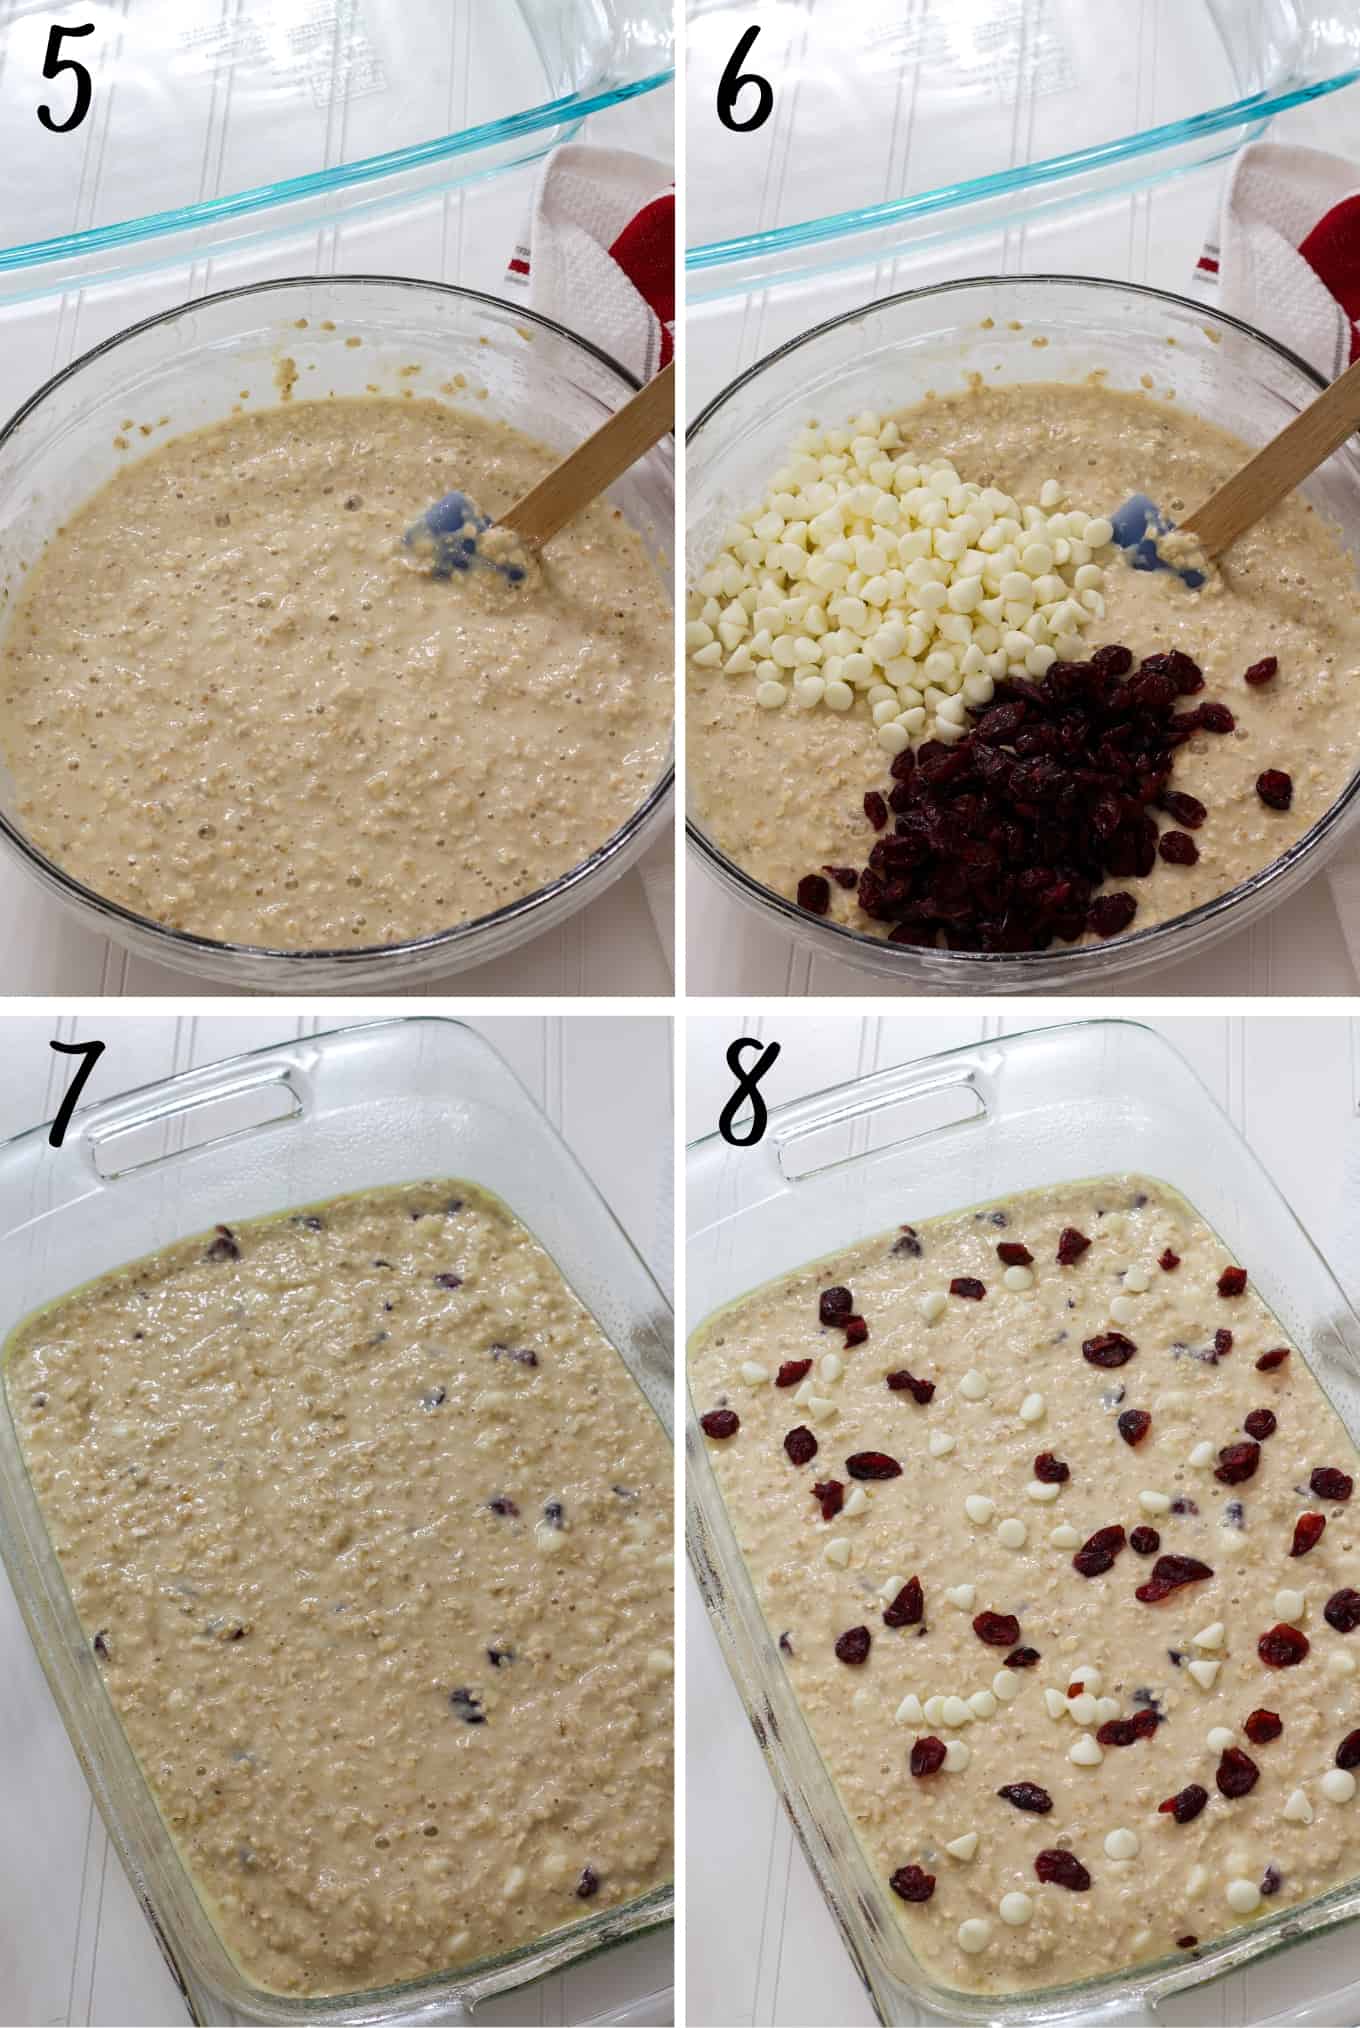 A collage of 4 numbered images showing the next steps to make the recipe.